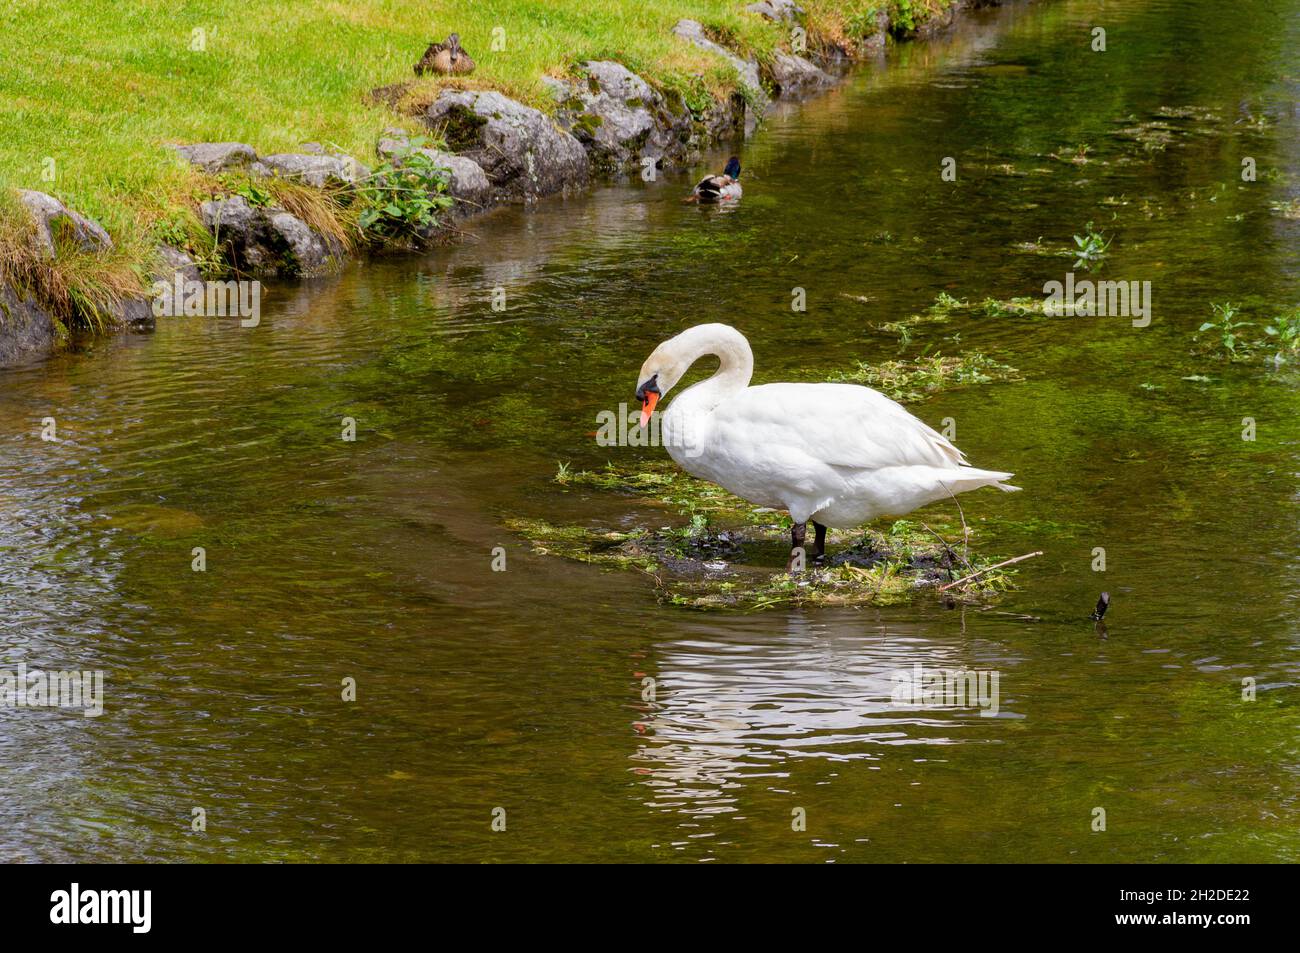 Swan in riparian ambiance at summer time Stock Photo